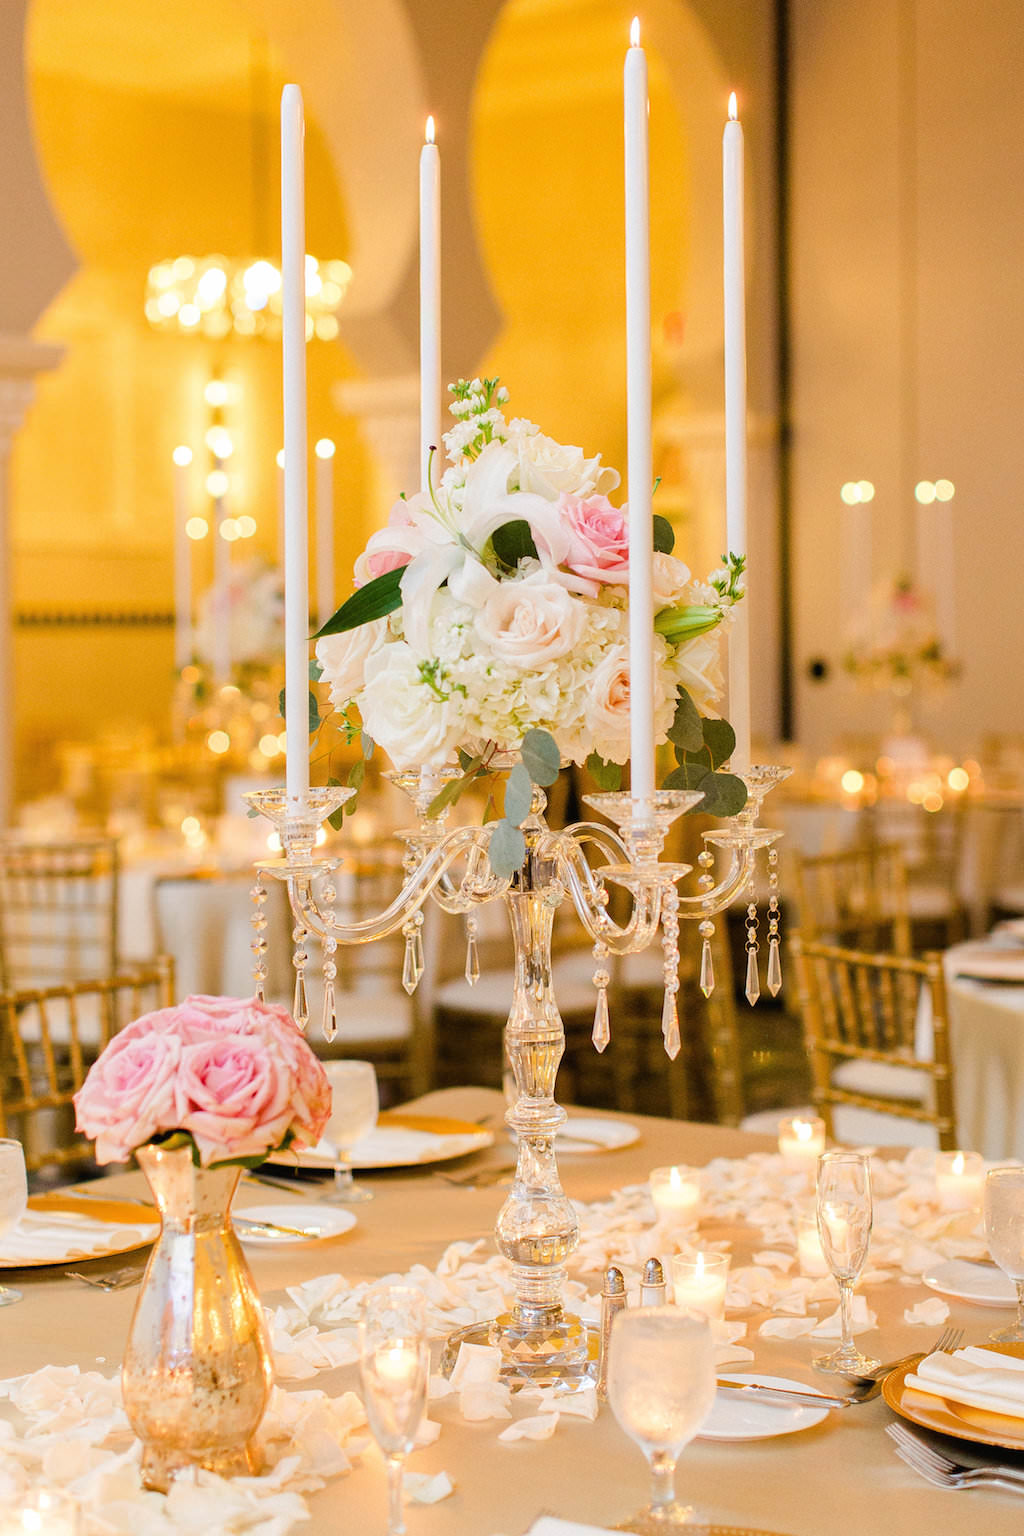 Gold and Ivory with Black and Blush Accent Hotel Ballroom Wedding Reception with Tall White, Pink and Greenery Centerpiece in Tall Candleholders with Gold Chiavari Chairs and Blush Linens | Downtown St Pete Historic Hotel Wedding Venue The Vinoy Renaissance | Tampa Bay Wedding Planner Love Lee Lane